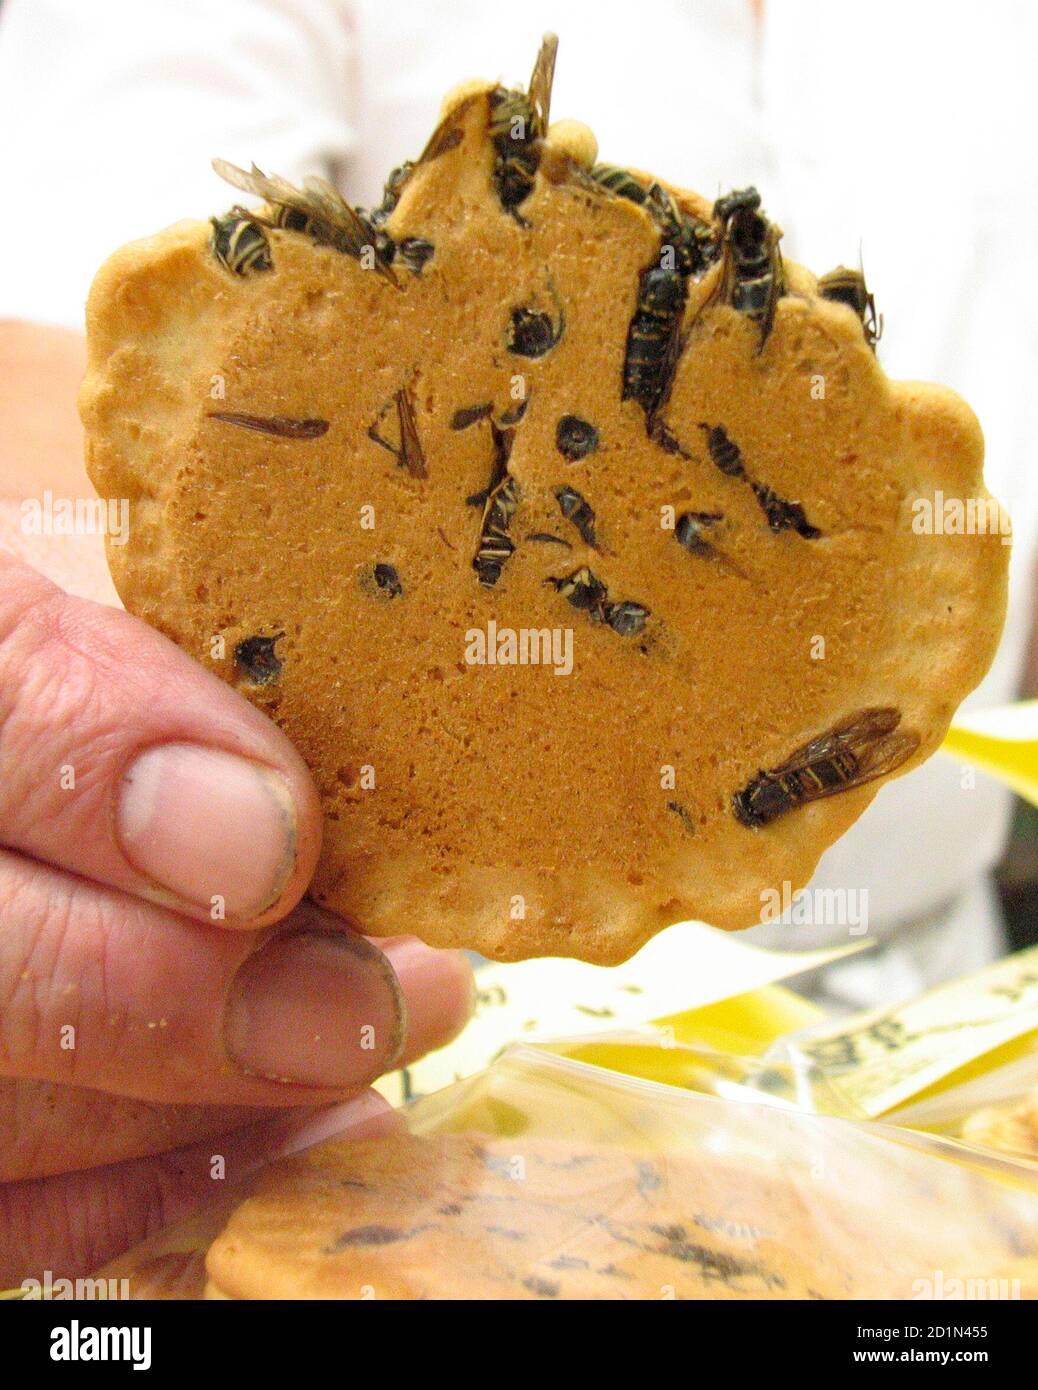 Jibachi senbei, or a digger wasp rice cracker, is held at a factory in Omachi town 200 km (124 miles) northwest of Tokyo September 4, 2007. A Japanese fan club for wasps has added the insects to rice crackers, saying the result adds a waspish scent to the traditional fare. Picture taken on September 4, 2007.  REUTERS/Toshi Maeda (JAPAN) Stock Photo